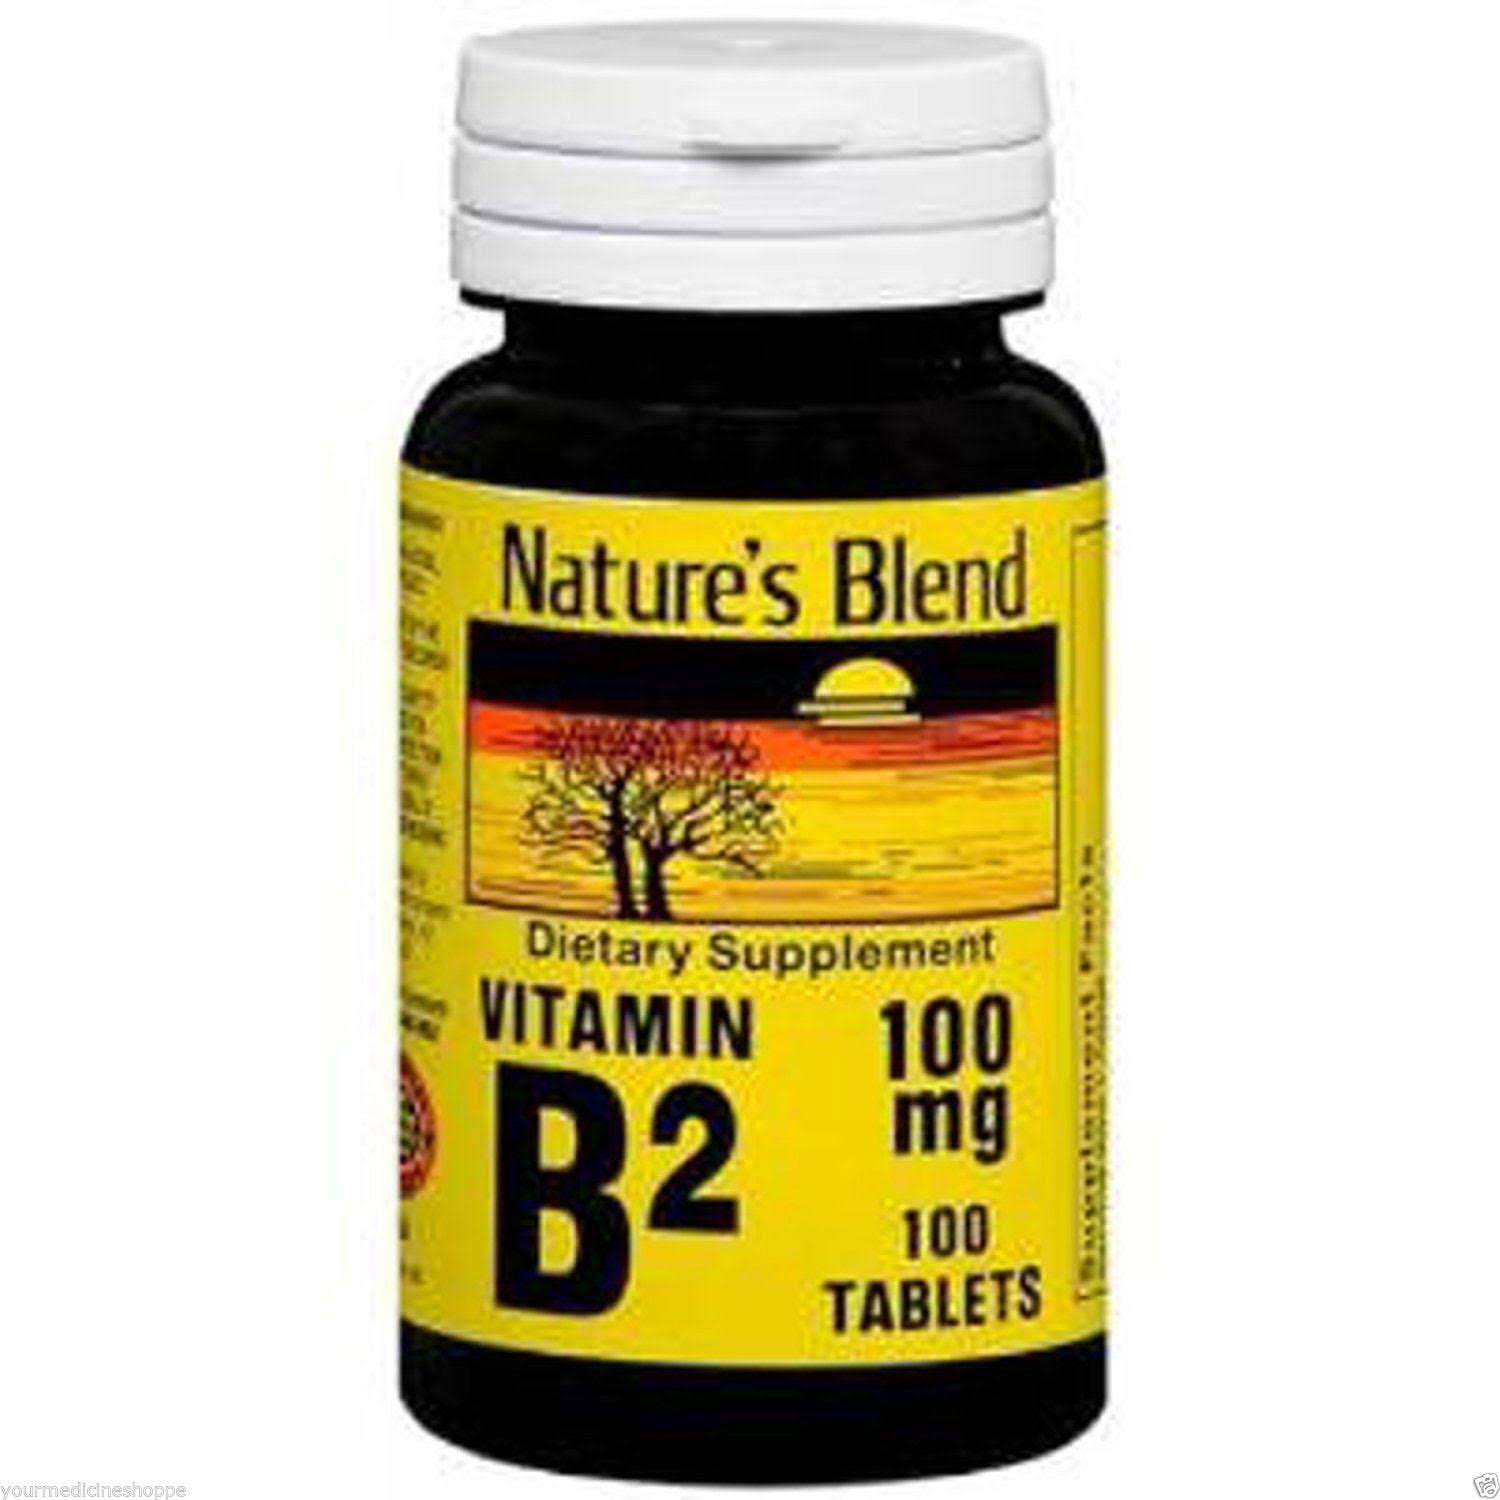 Nature's Blend Vitamin B2 Dietary Supplement - 100mg, 100 Tablets